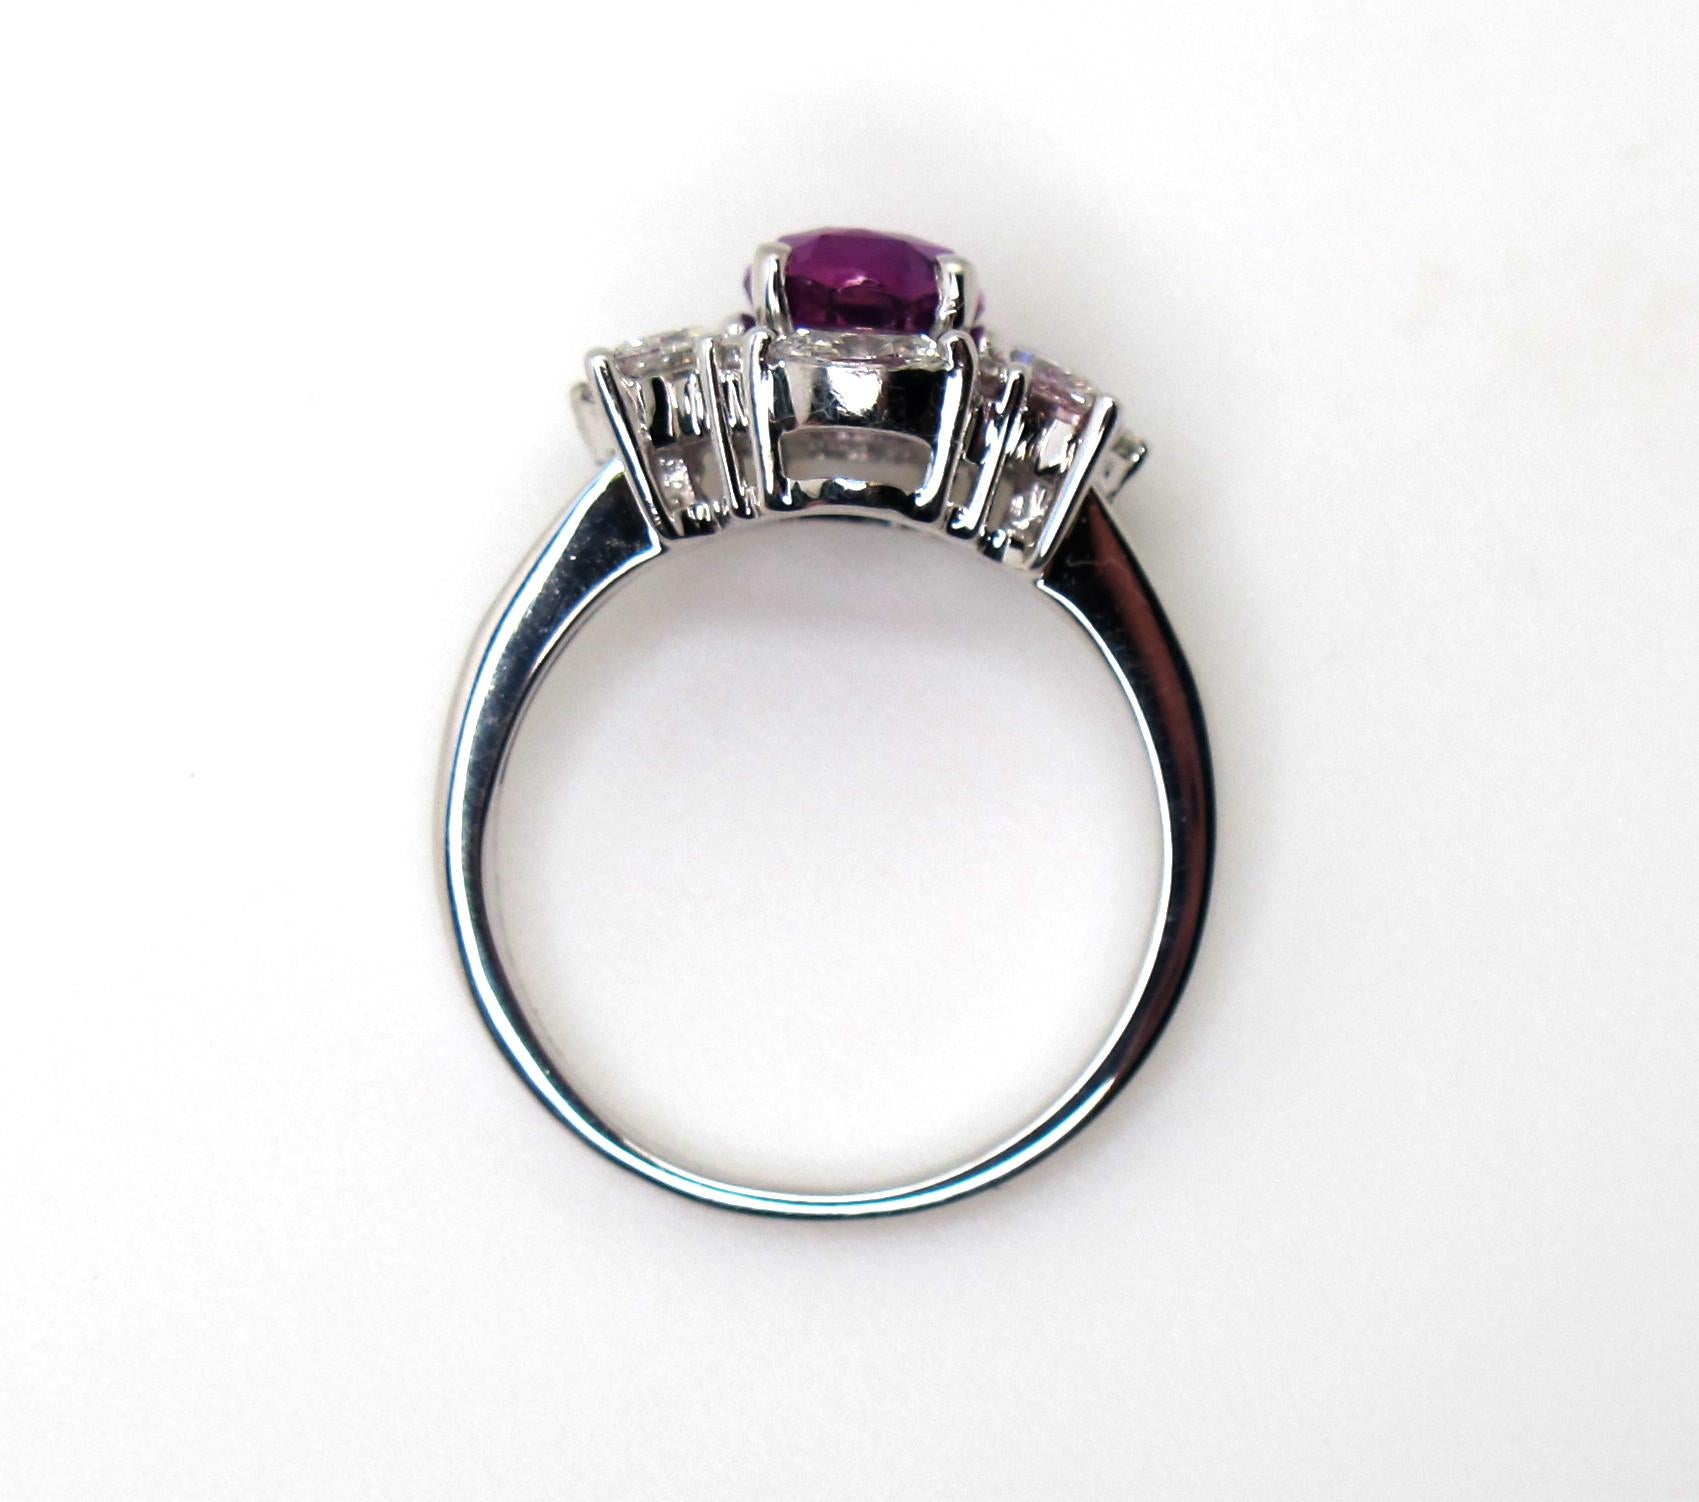 2.27 ct. Hot Pink Sapphire Oval, Diamond Marquise 18k White Gold Cocktail Ring 3